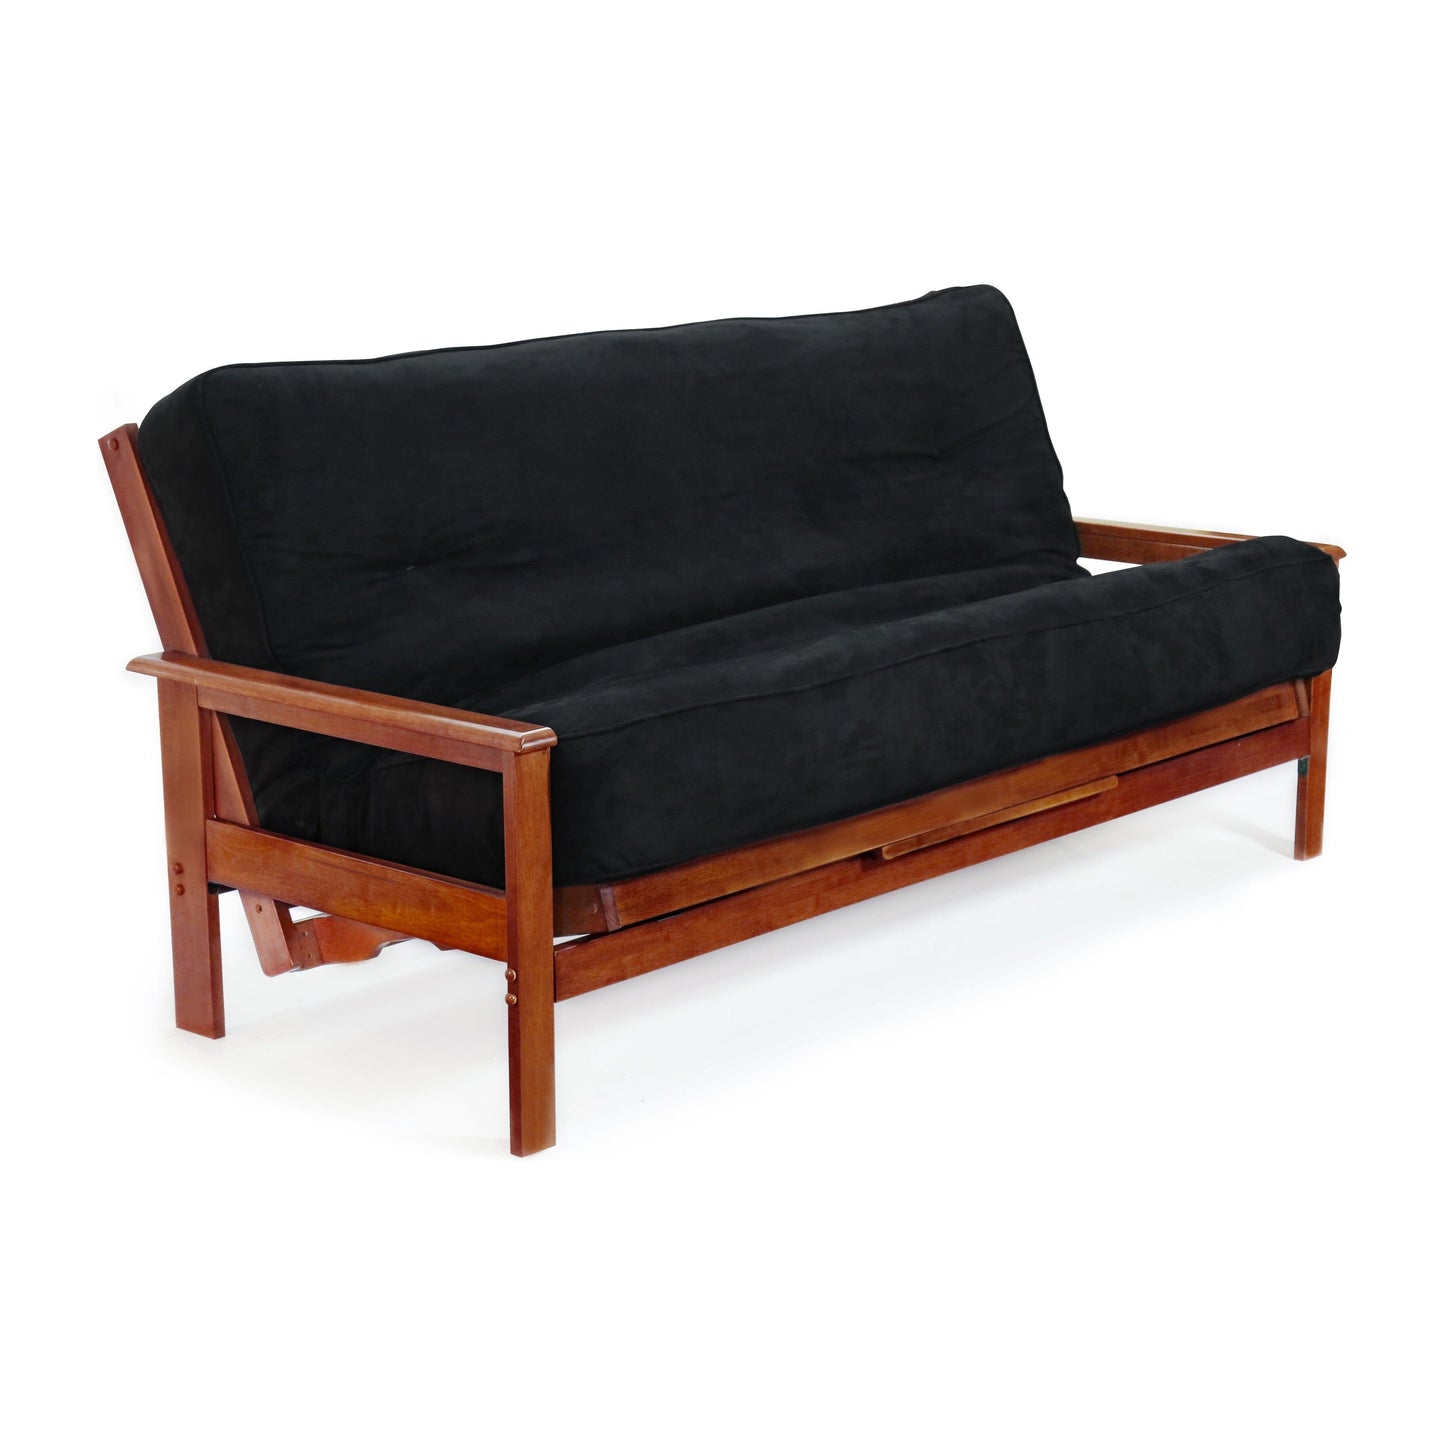 Night and Day Albany Queen Futon Frame in black walnut finish- Frame only Cherry ABY-BA-BMG-QEN-CH